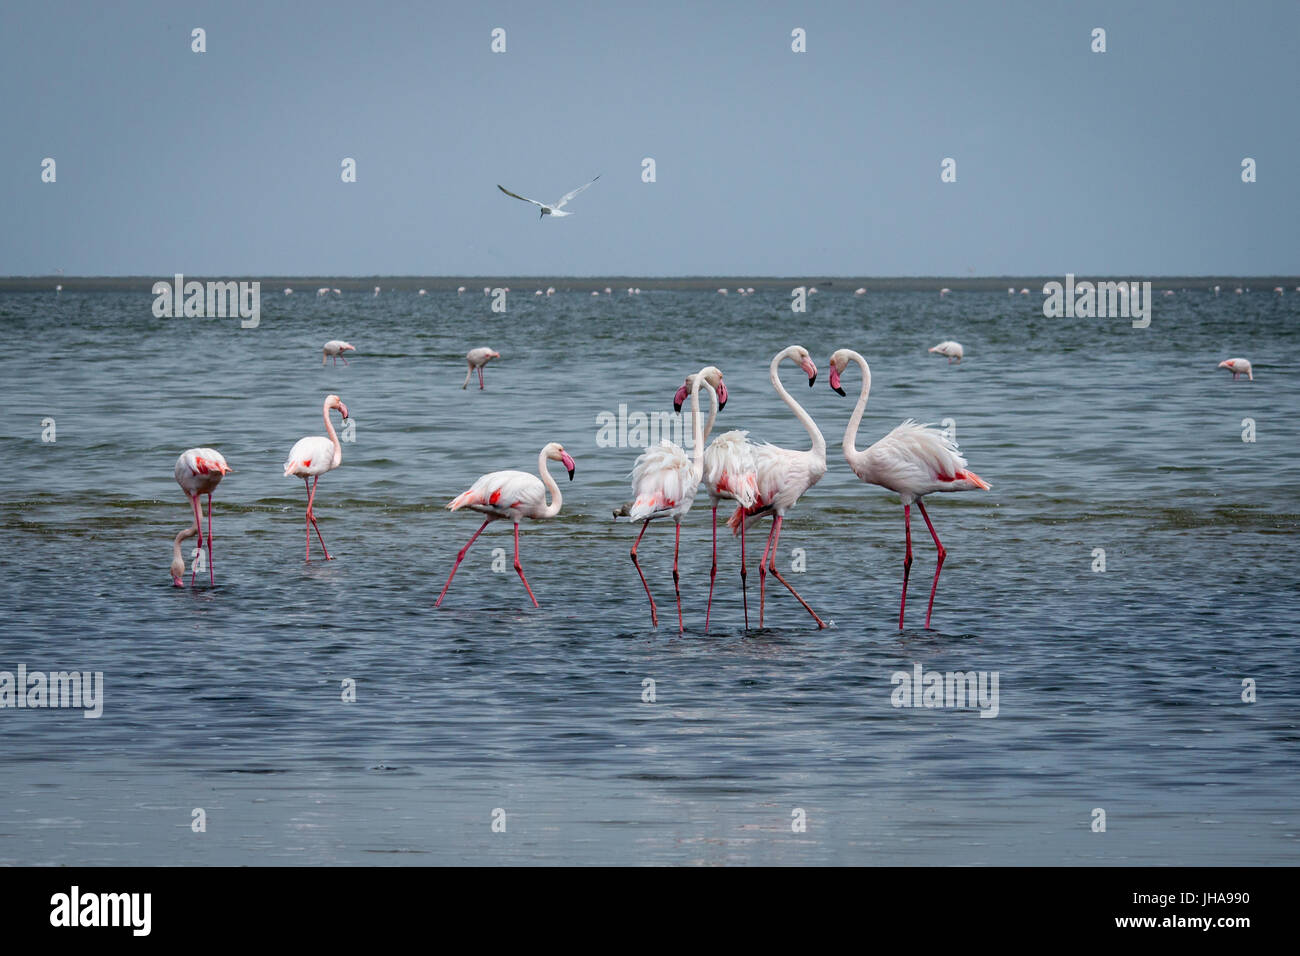 Group of Flamingos Standing in Sea, Walvis Bay, Namibia Stock Photo